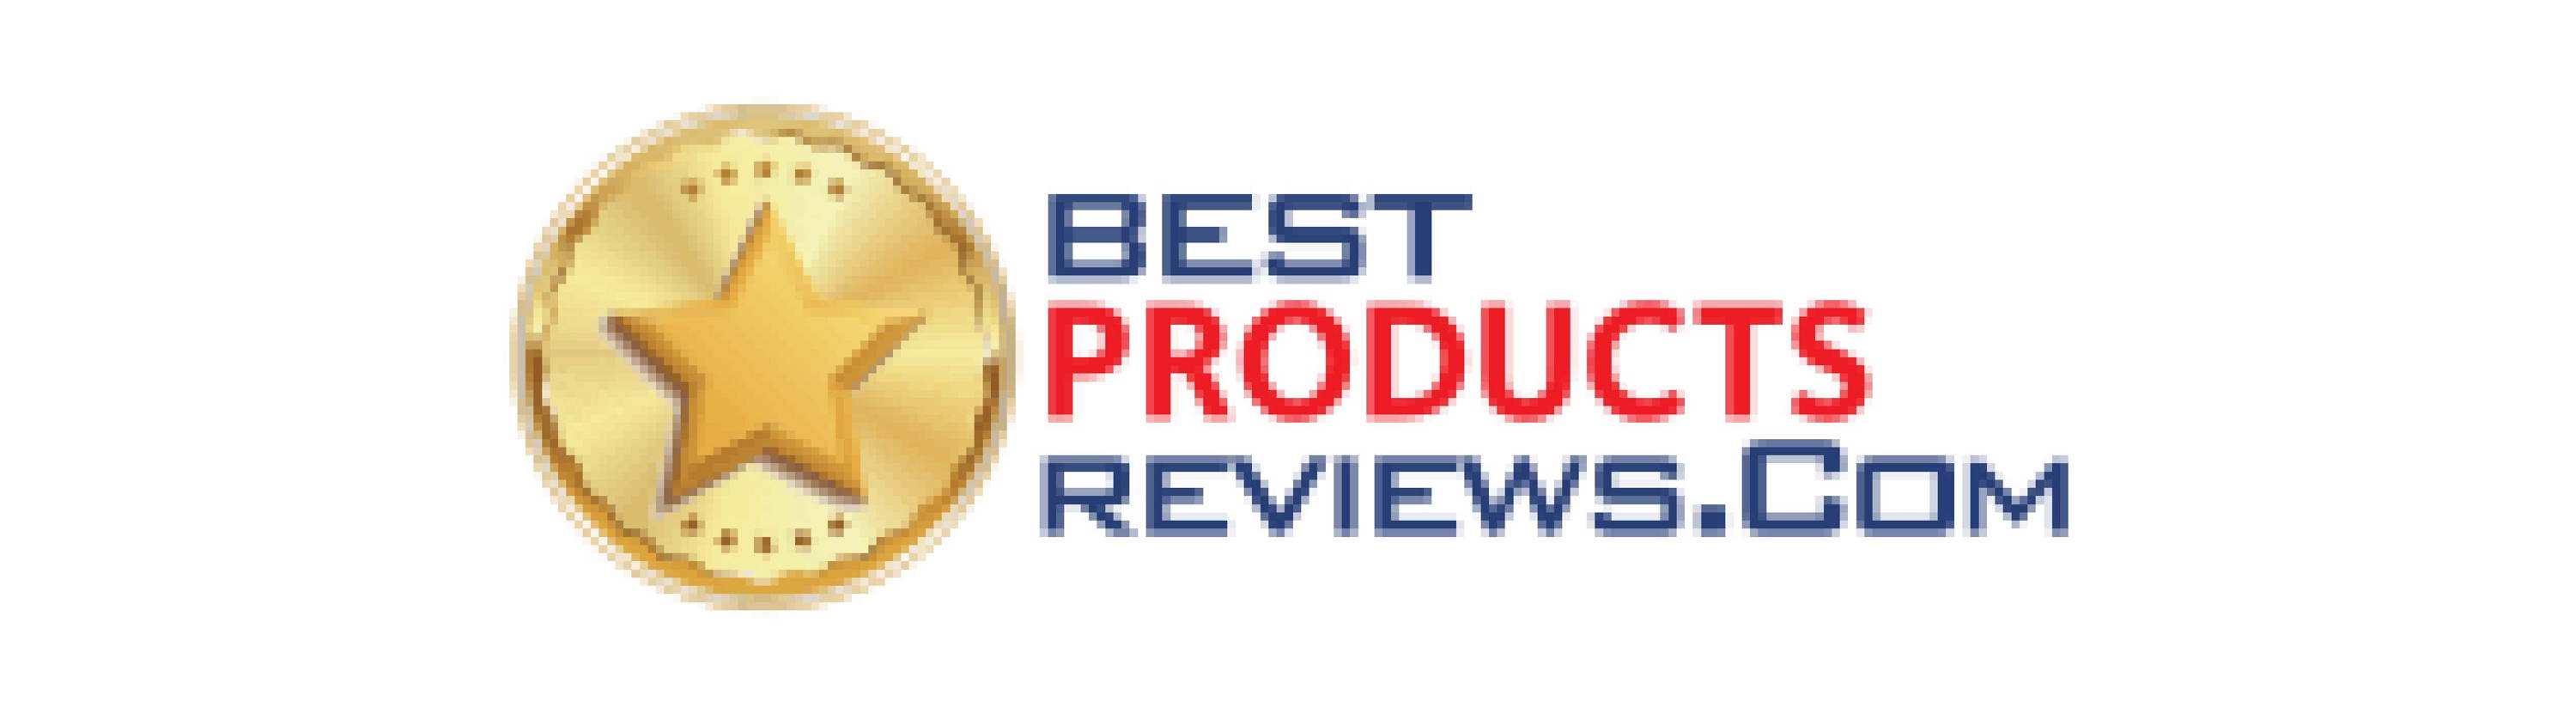 best product reviews article